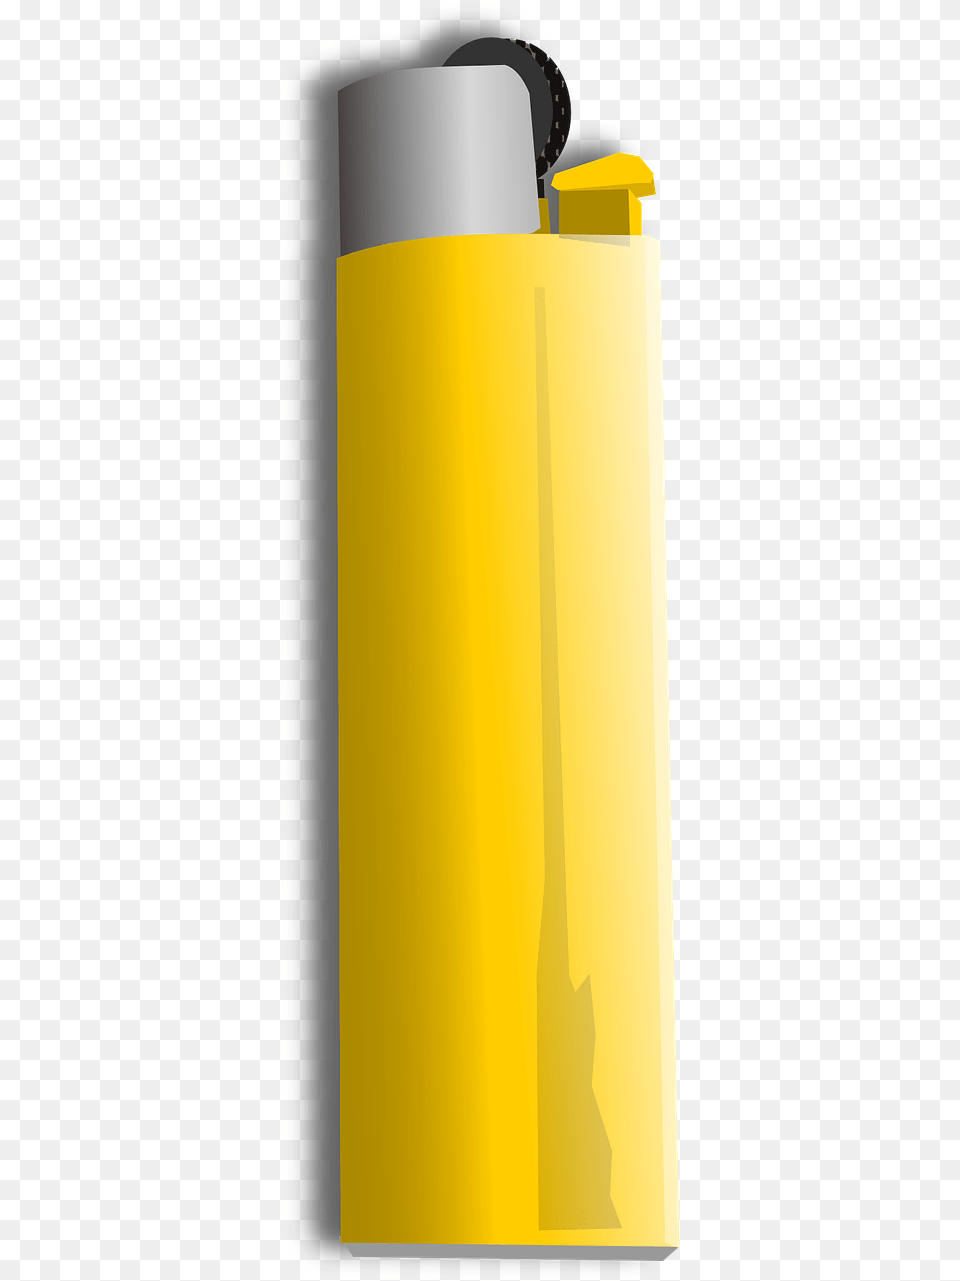 Lighter Cigarette Fire Smoke Yellow Water Bottle Free Png Download